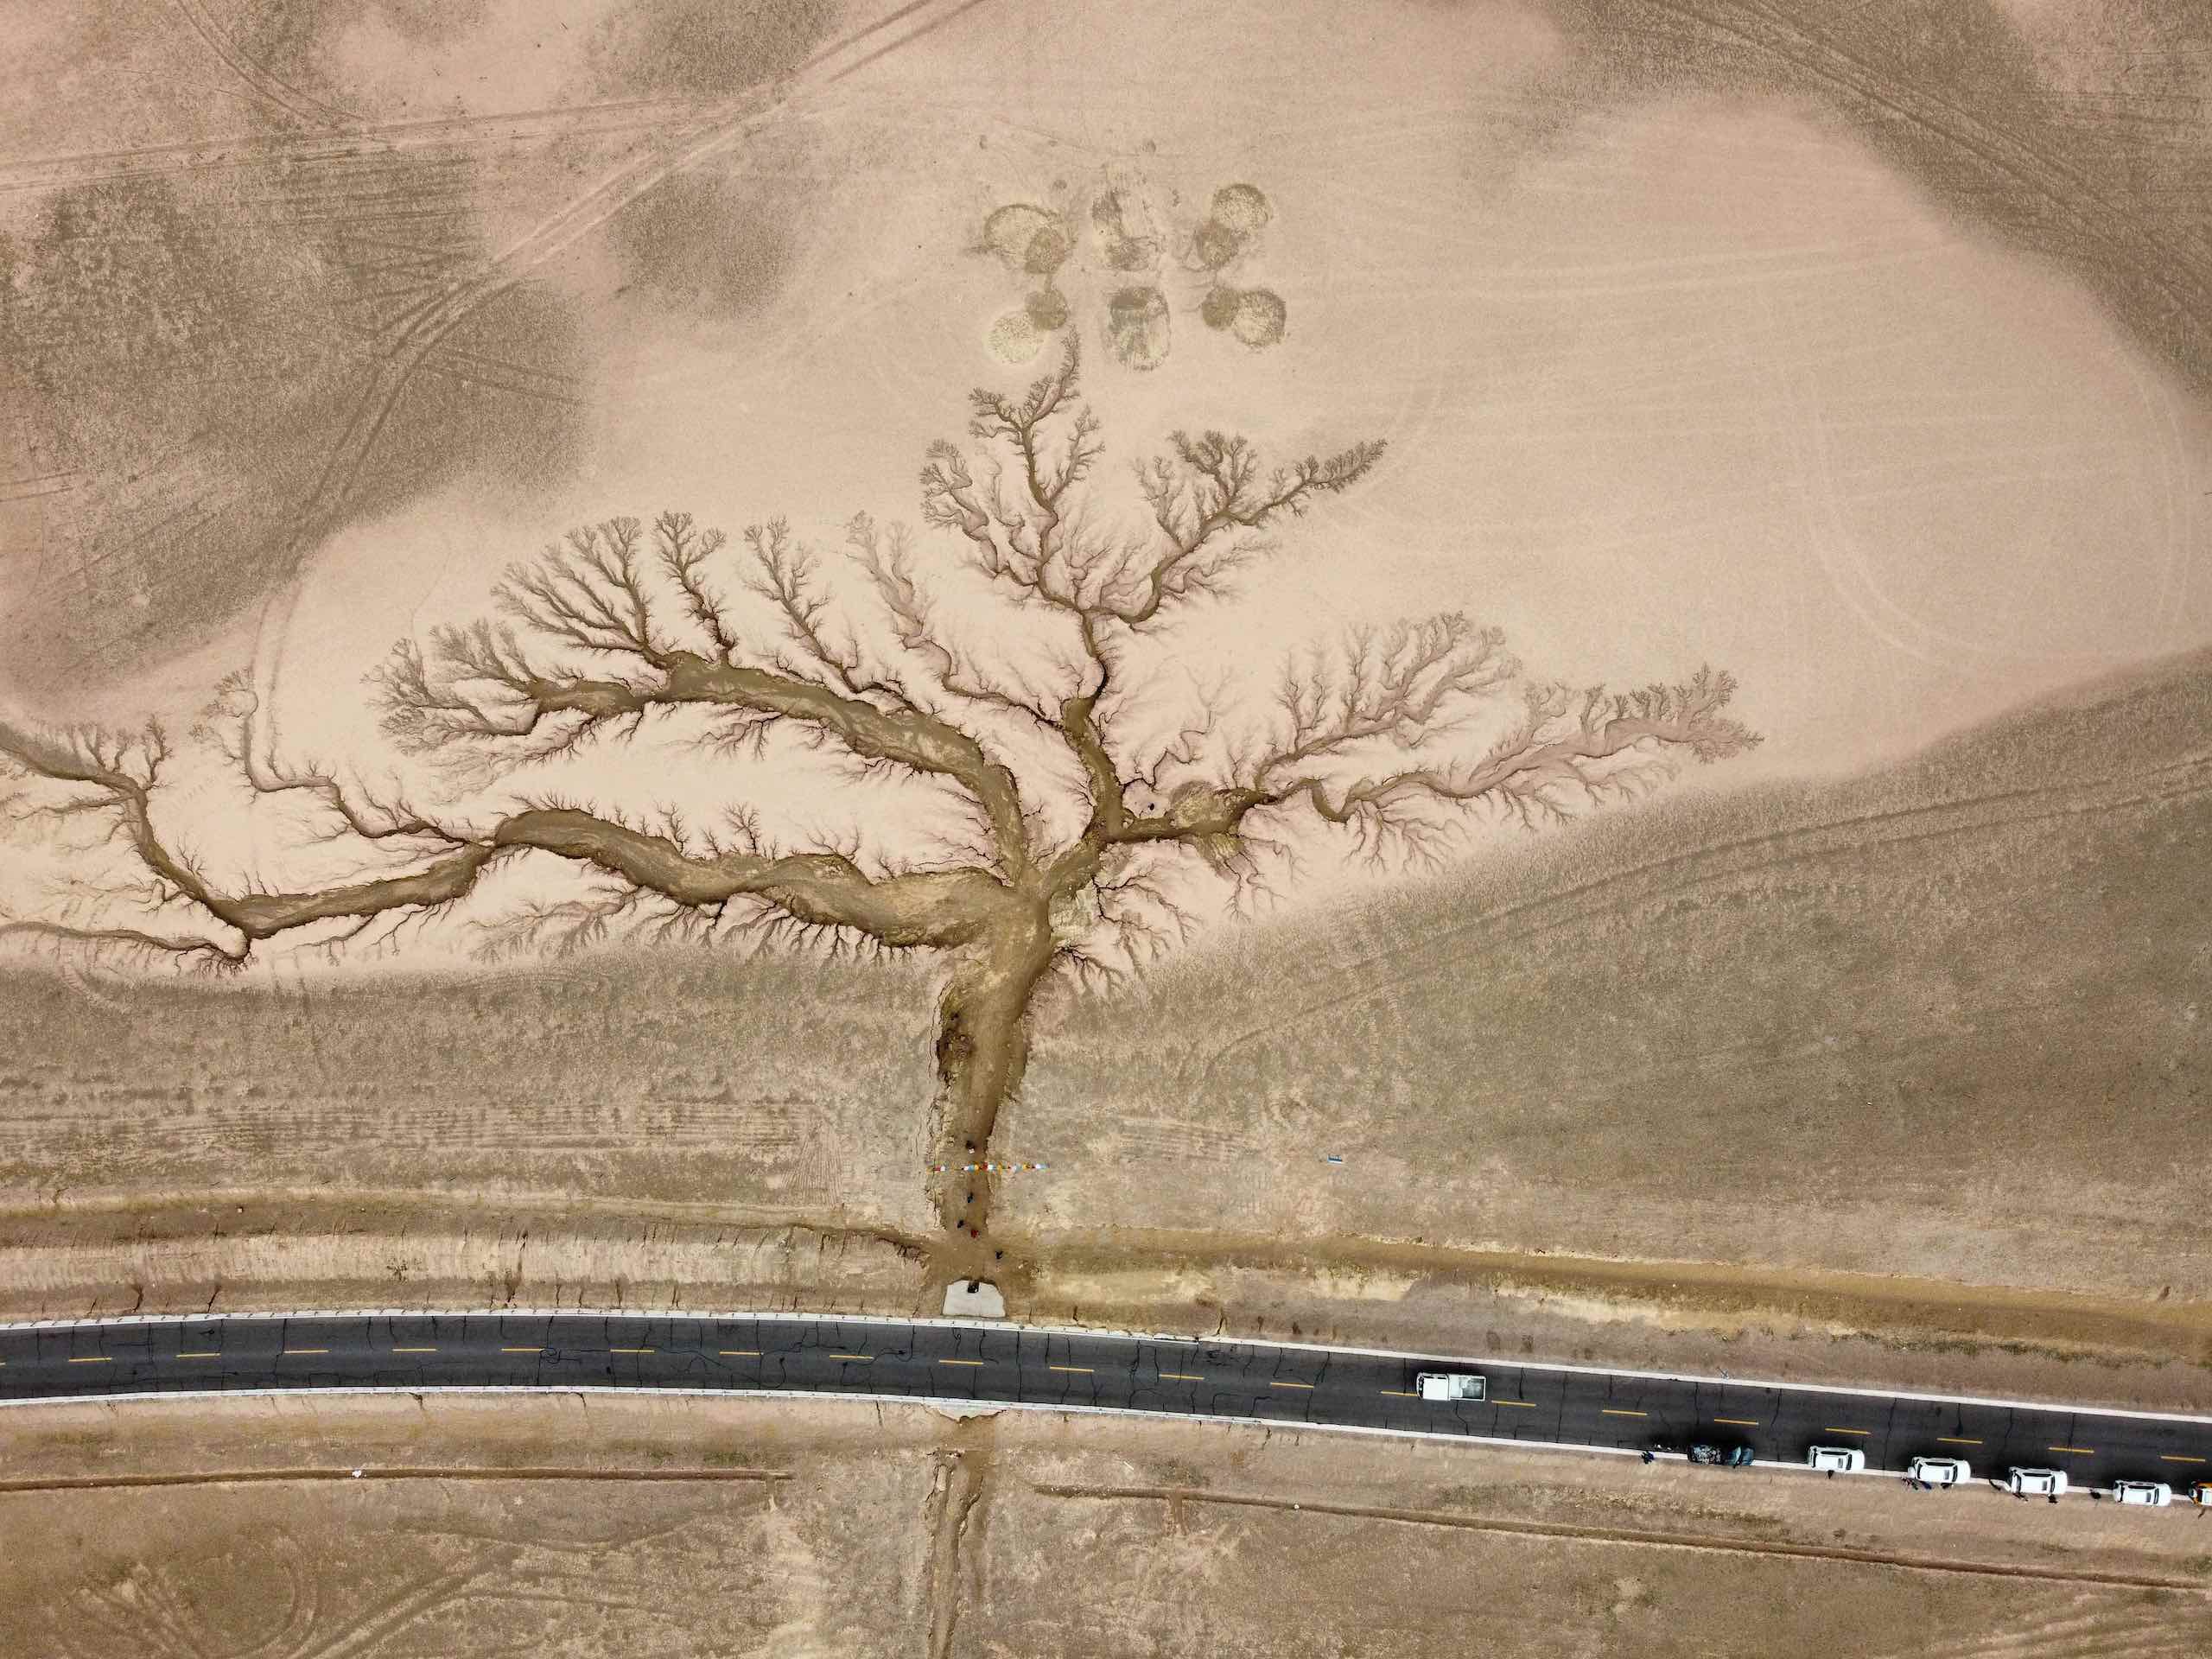 <p>The “Tree in the Sky” along the national highway 317 in northern Tibet (Image: Yang Yong)</p>